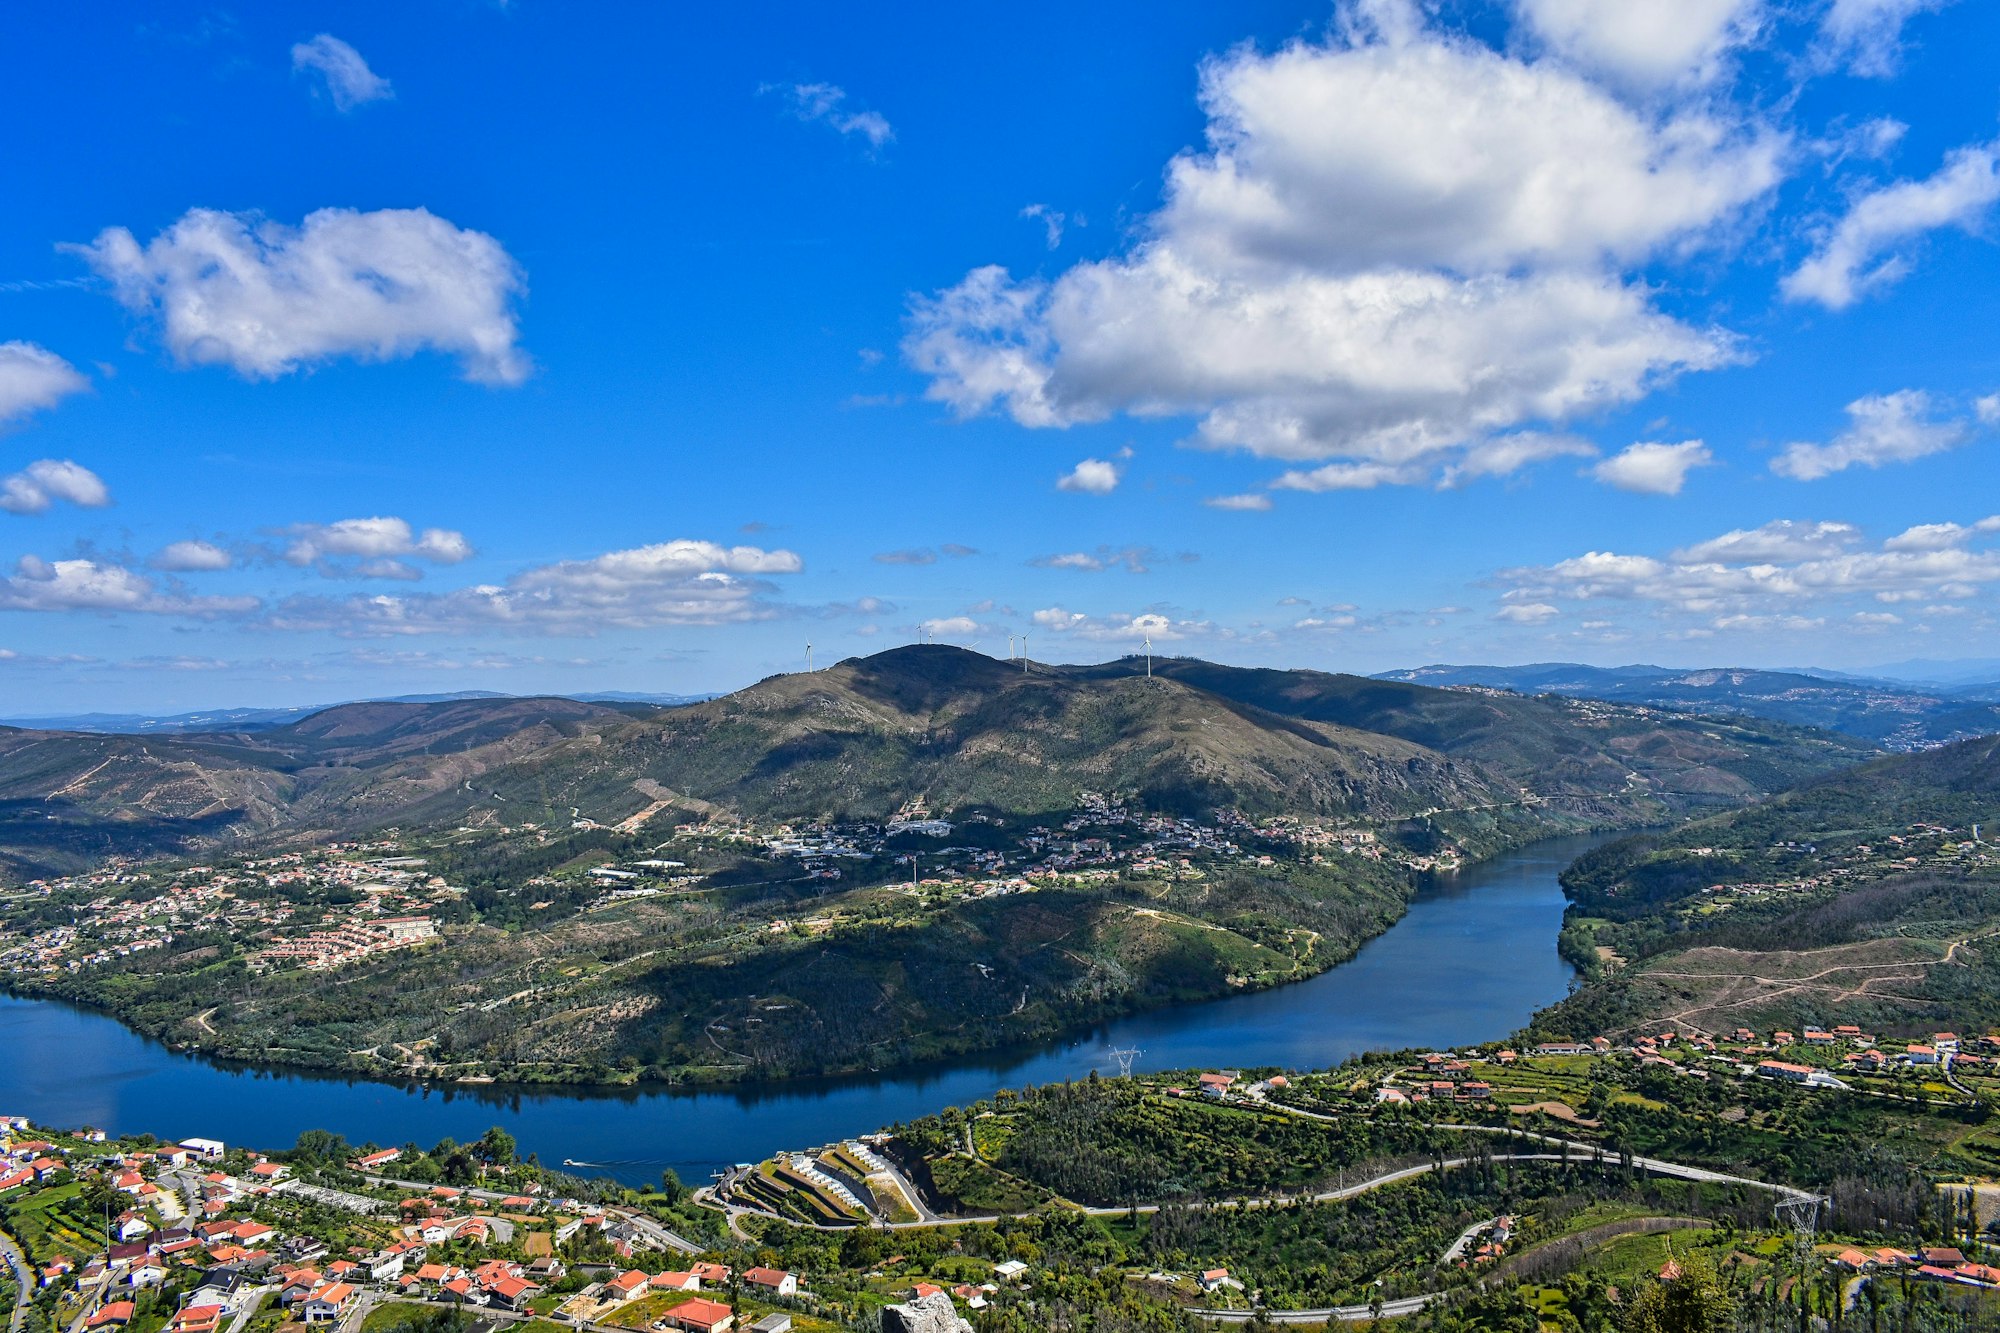 São Domingos Mountain with this amazing view to Douro river. A must go if you are in the North of Portugal.

https://www.instagram.com/p/BxvK7WygFV-/